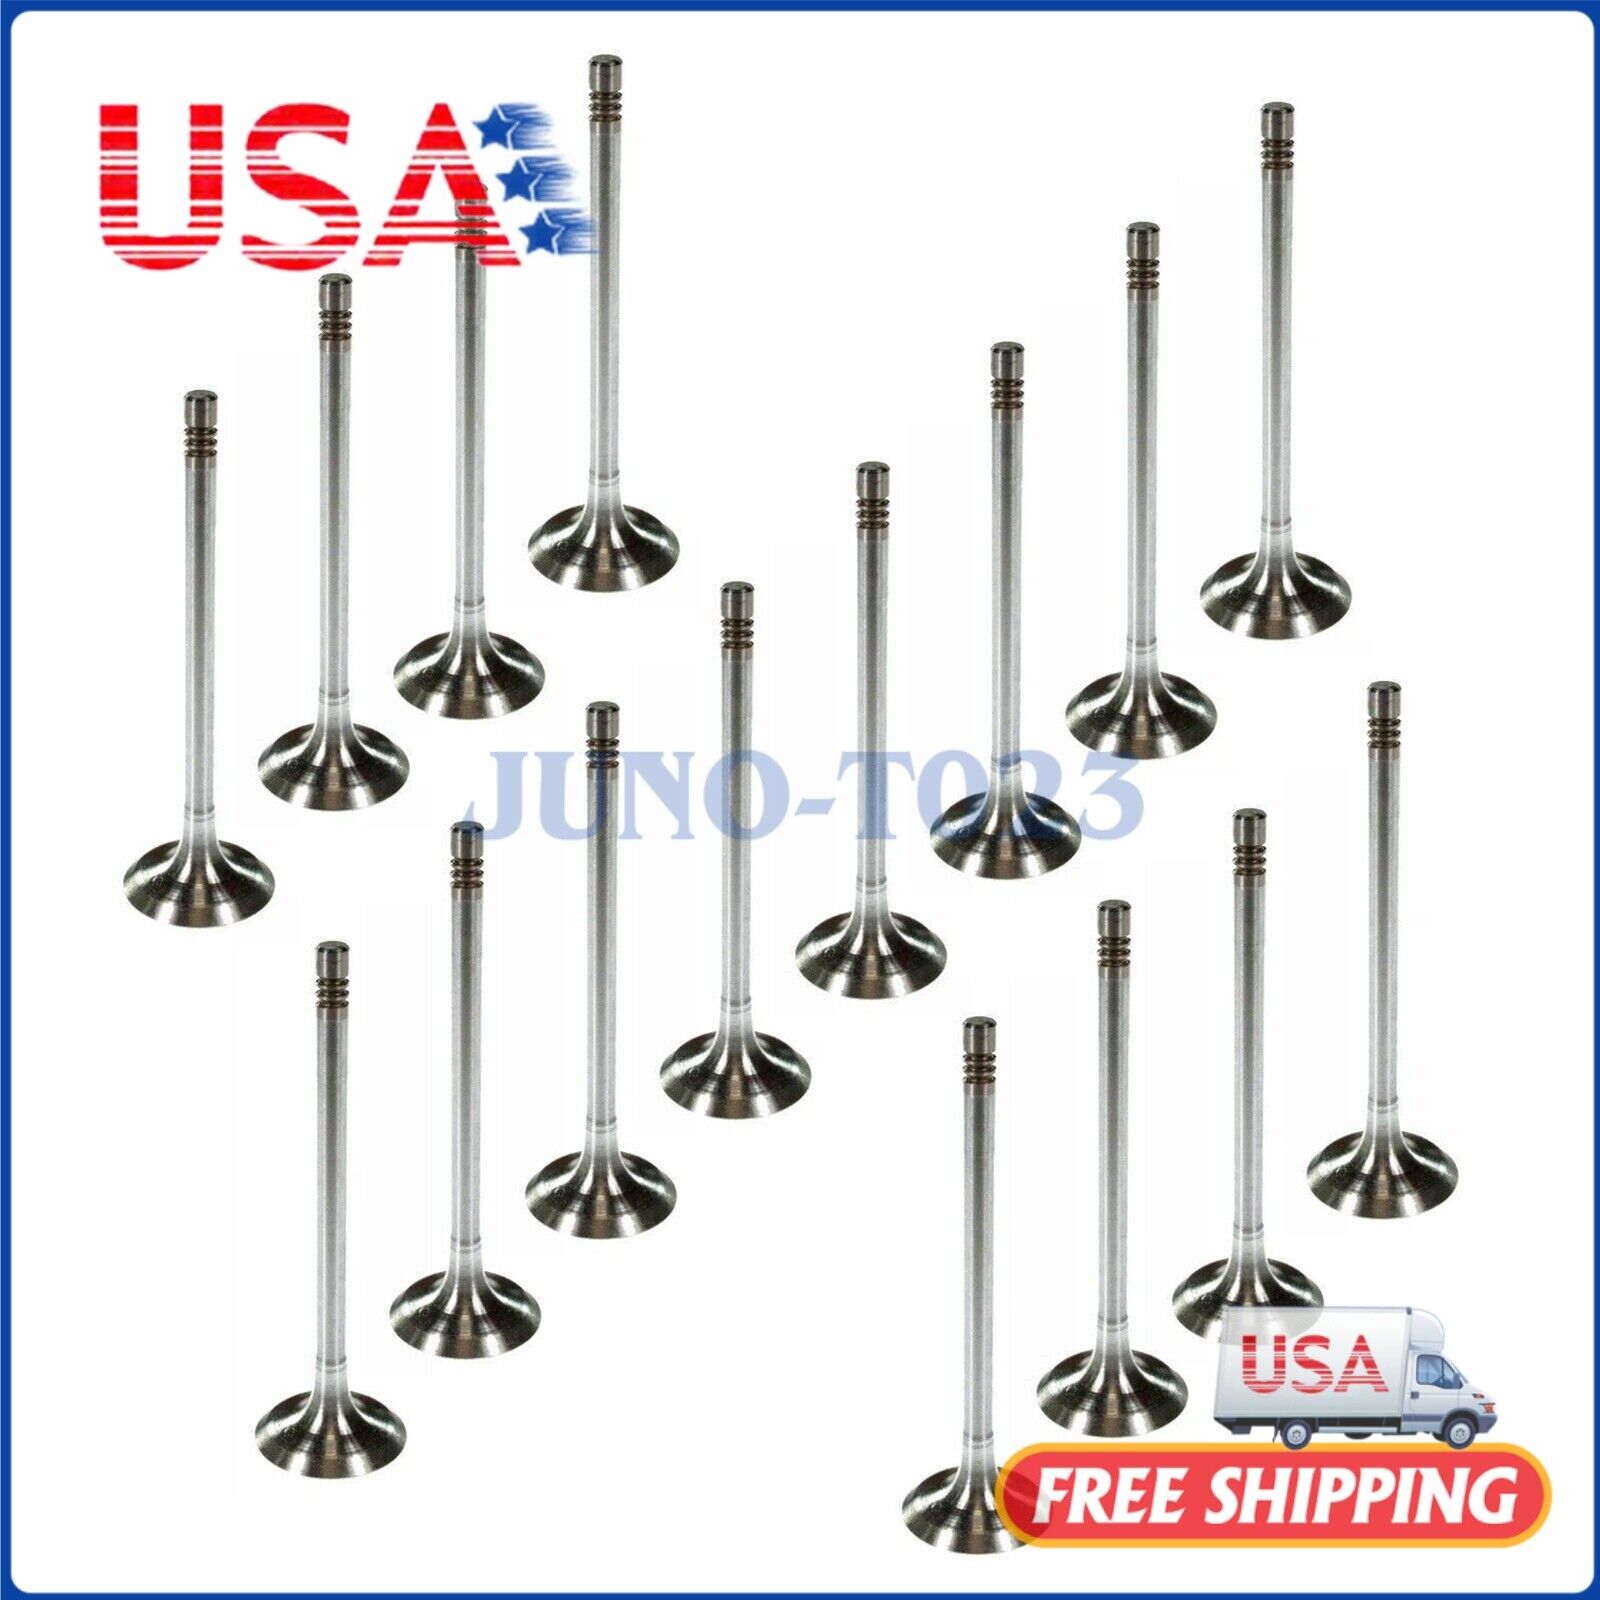 16X Intake Exhaust Valves Set For 07-2017 Chevrolet GM Buick Saturn 2.0L 2.4L